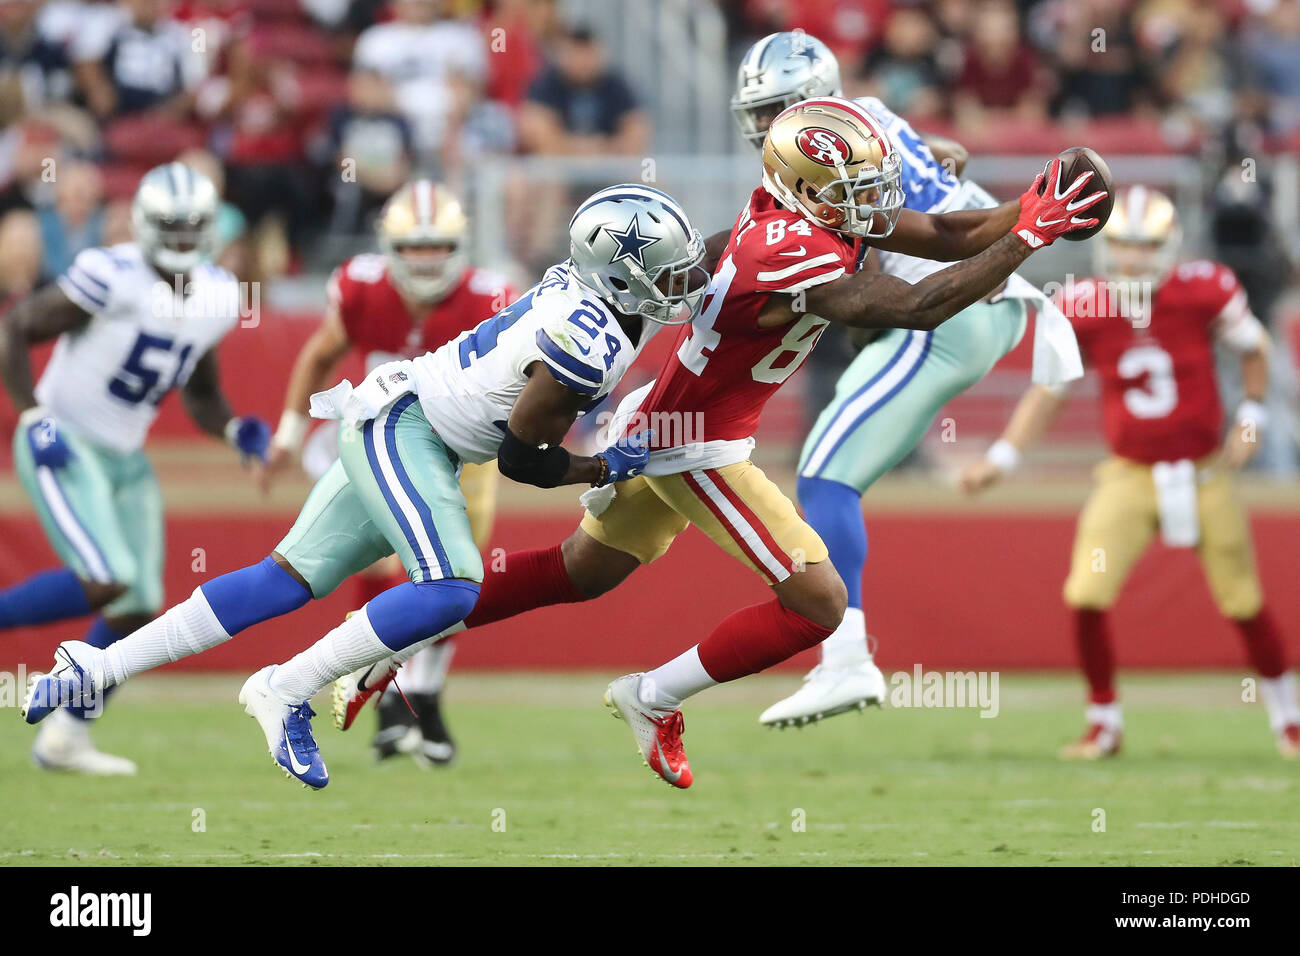 San Jose, USA. August 8, 2018: San Francisco 49ers wide receiver Kendrick Bourne (84) makes a leaping catch ahead of trailing defender Dallas Cowboys cornerback Chidobe Awuzie (24) in the game between the Dallas Cowboys and San Francisco 49ers, Levi Stadium, San Jose, CA. Photographer: Peter Joneleit Credit: Cal Sport Media/Alamy Live News Stock Photo